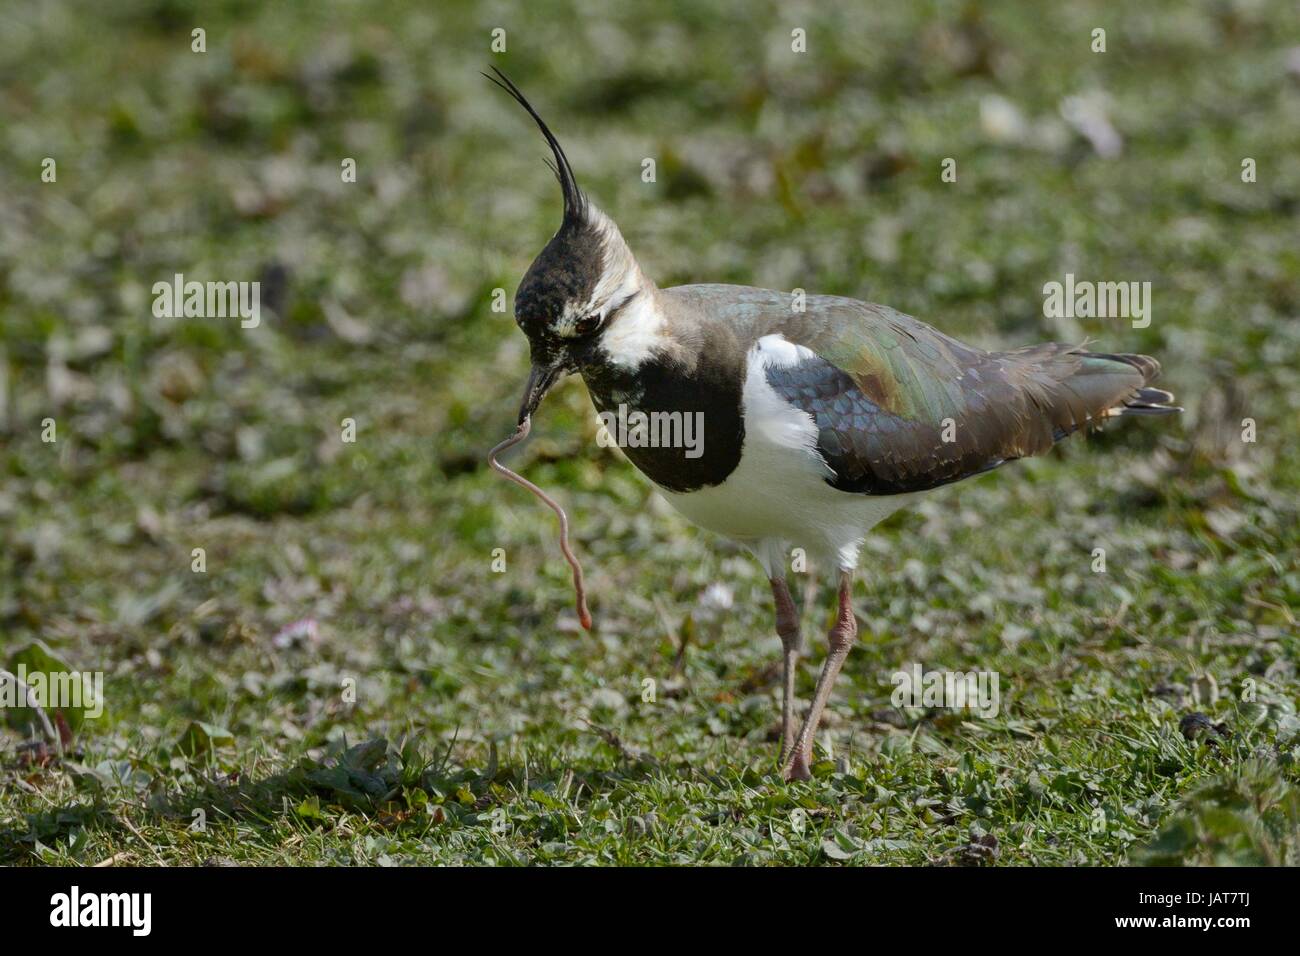 Lapwing (Vanellus vanellus) with an Earthworm (Lumbricus terrestris) it has caught on the grassy margins of a lake, Gloucestershire, UK, April. Stock Photo